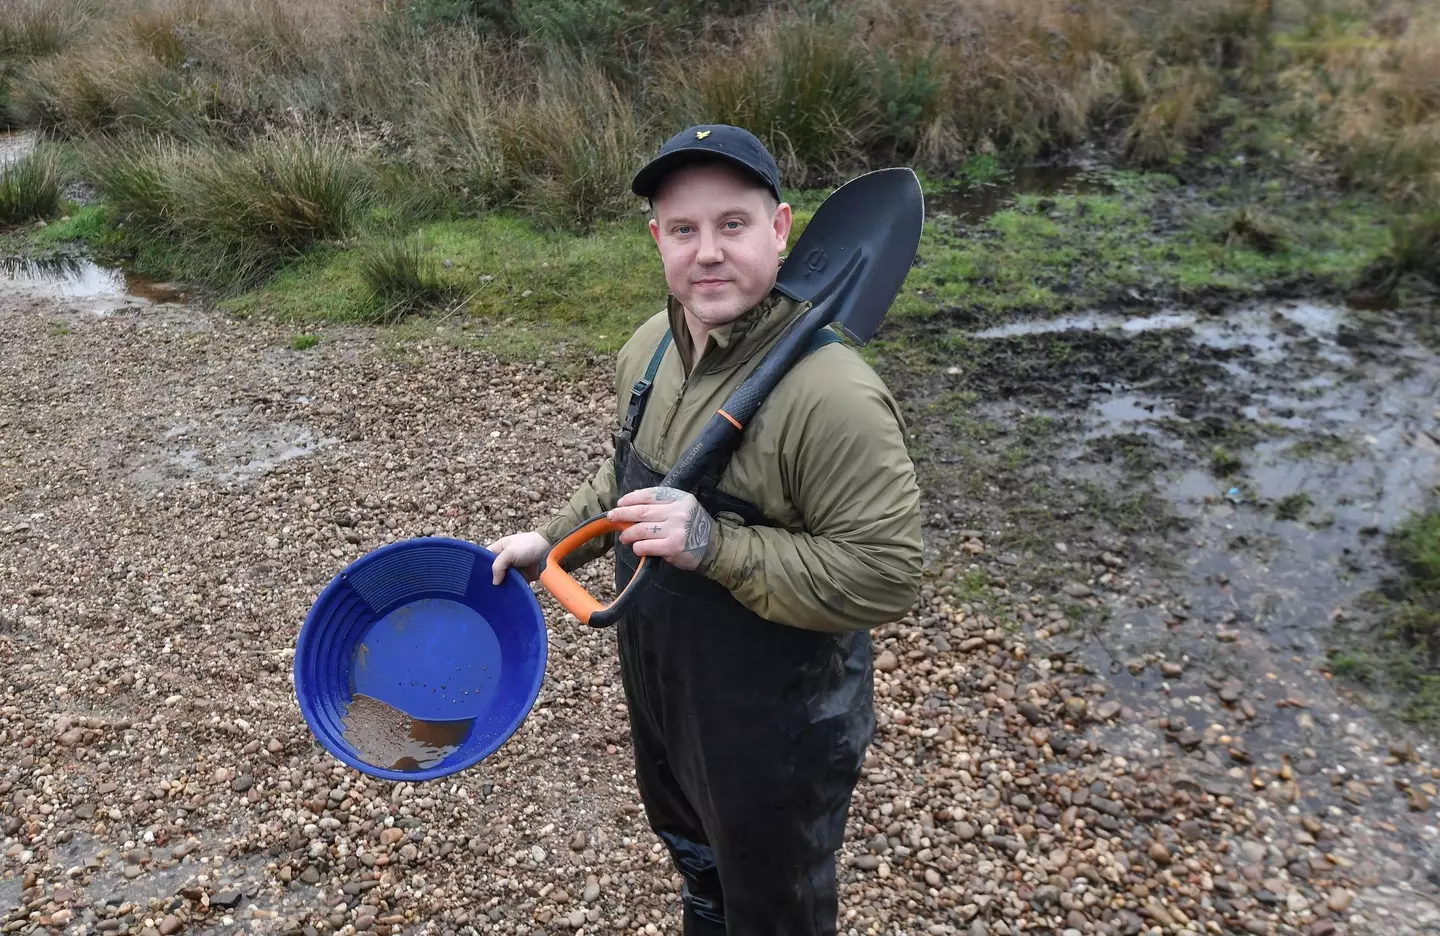 The man found gold in a stream near a huge UK city.